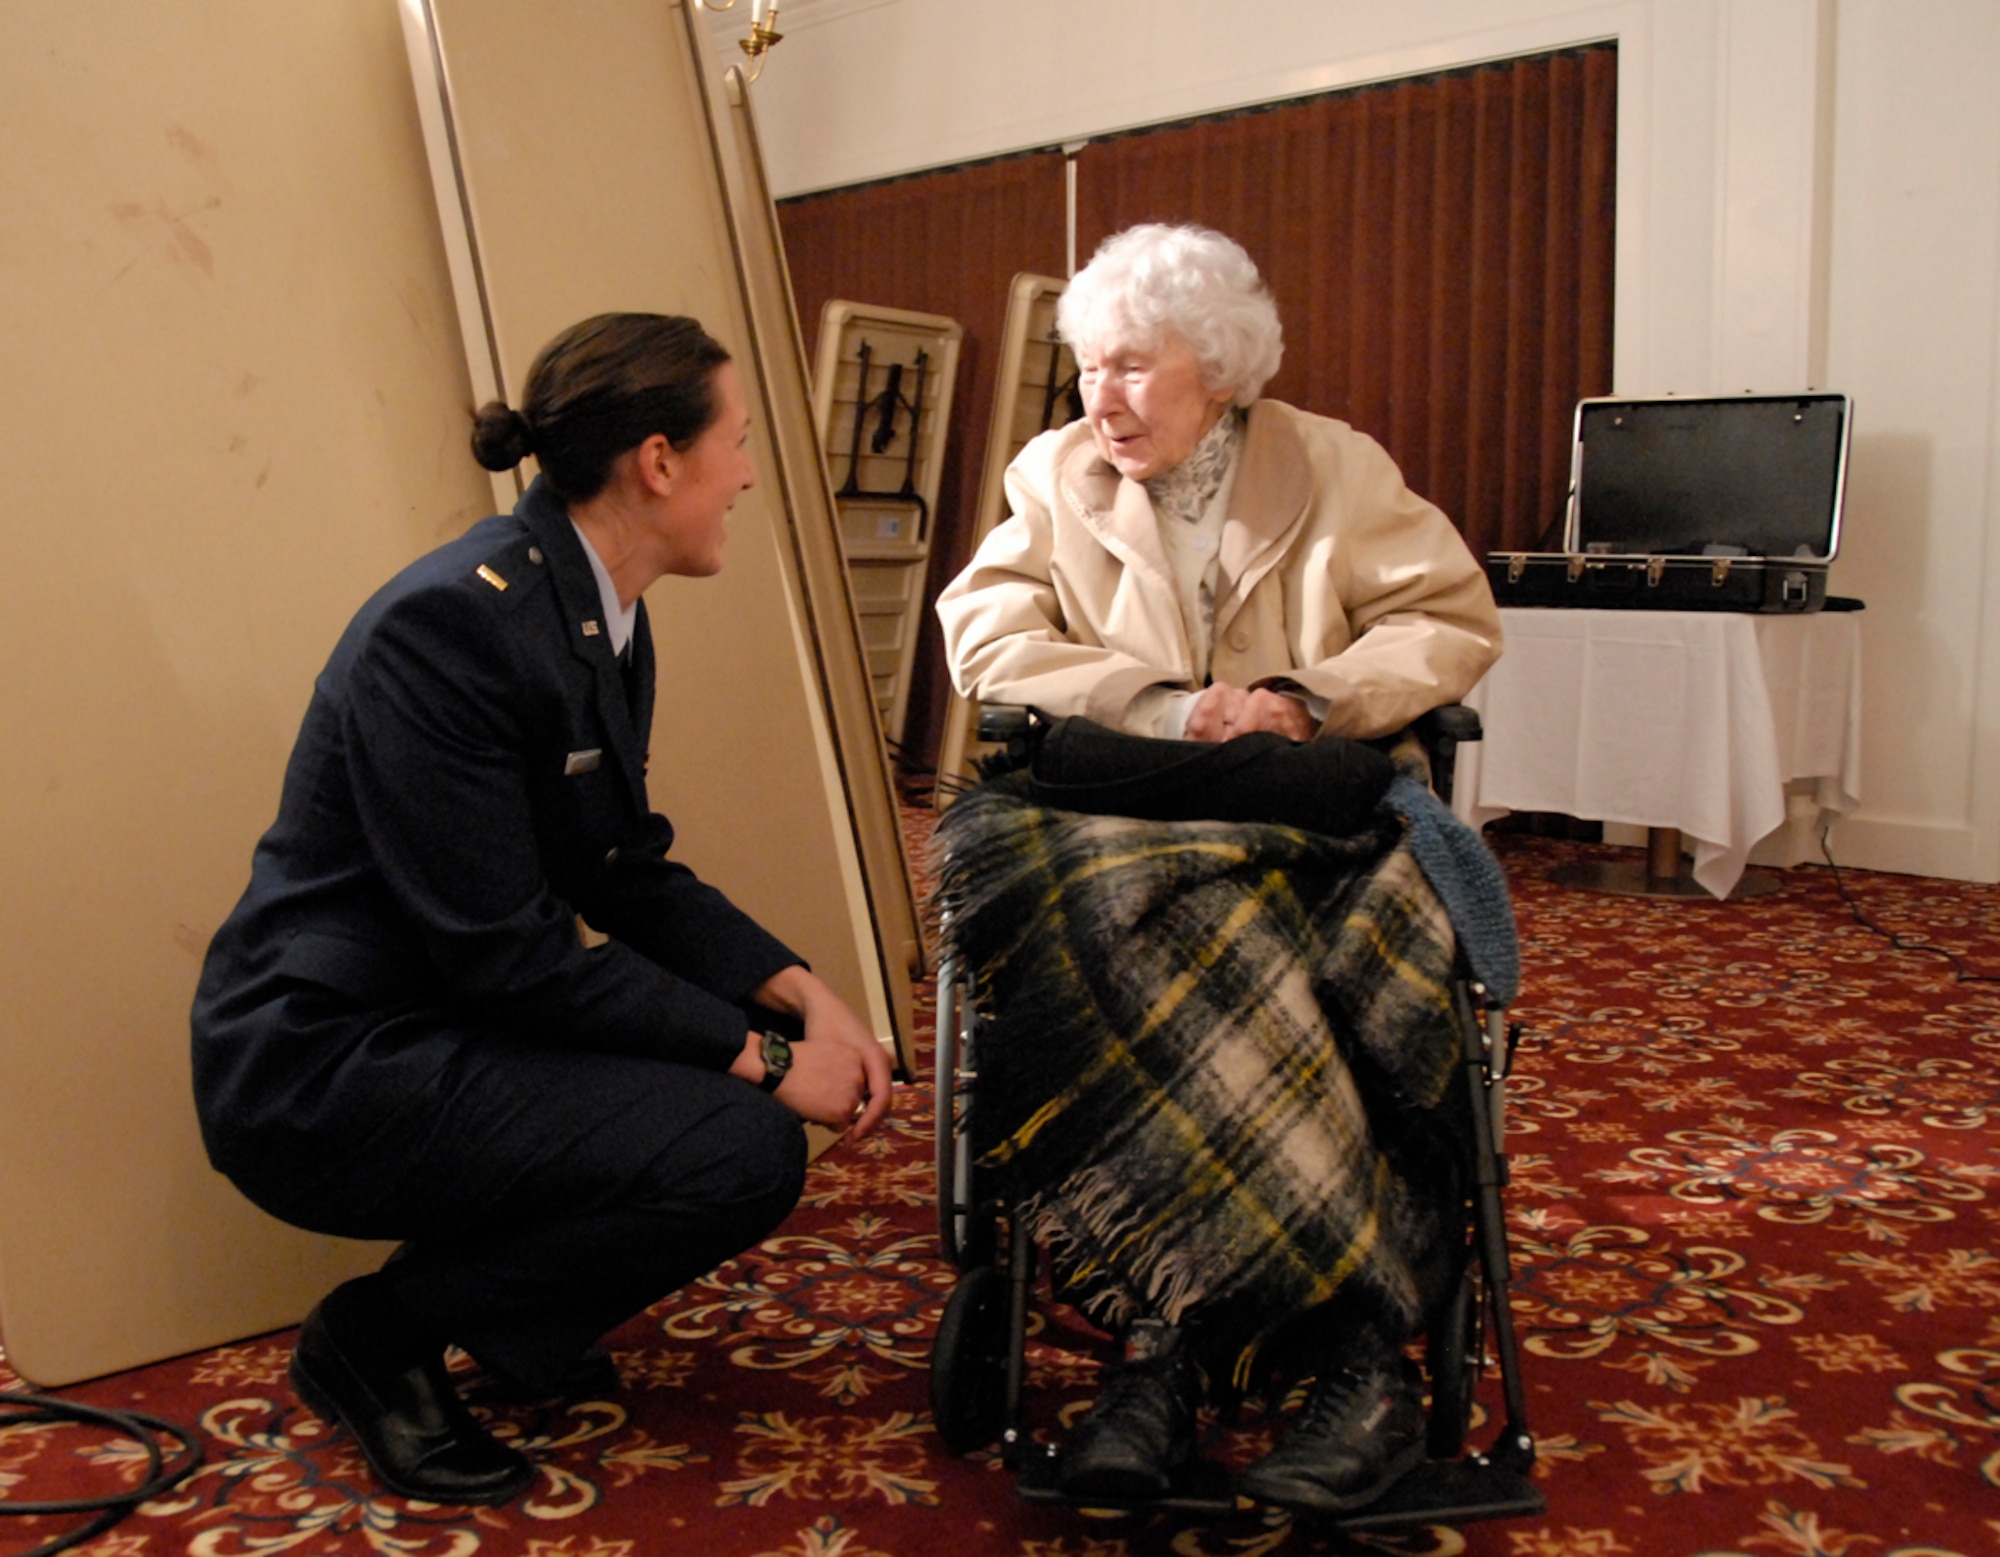 Right, 2nd Lt. Katie Miller talks with retired Chief Master Sgt. Esther MacKay, 101, about her time in the Air Force. Chief MacKay was interviewed as part of Hanscom's Living History project. The documentary will highlight servicemember and their families’ contributions to the Air Force over the past 60 years. (U.S. Air Force photo by 1st Lt. Martha Petersante-Gioia)